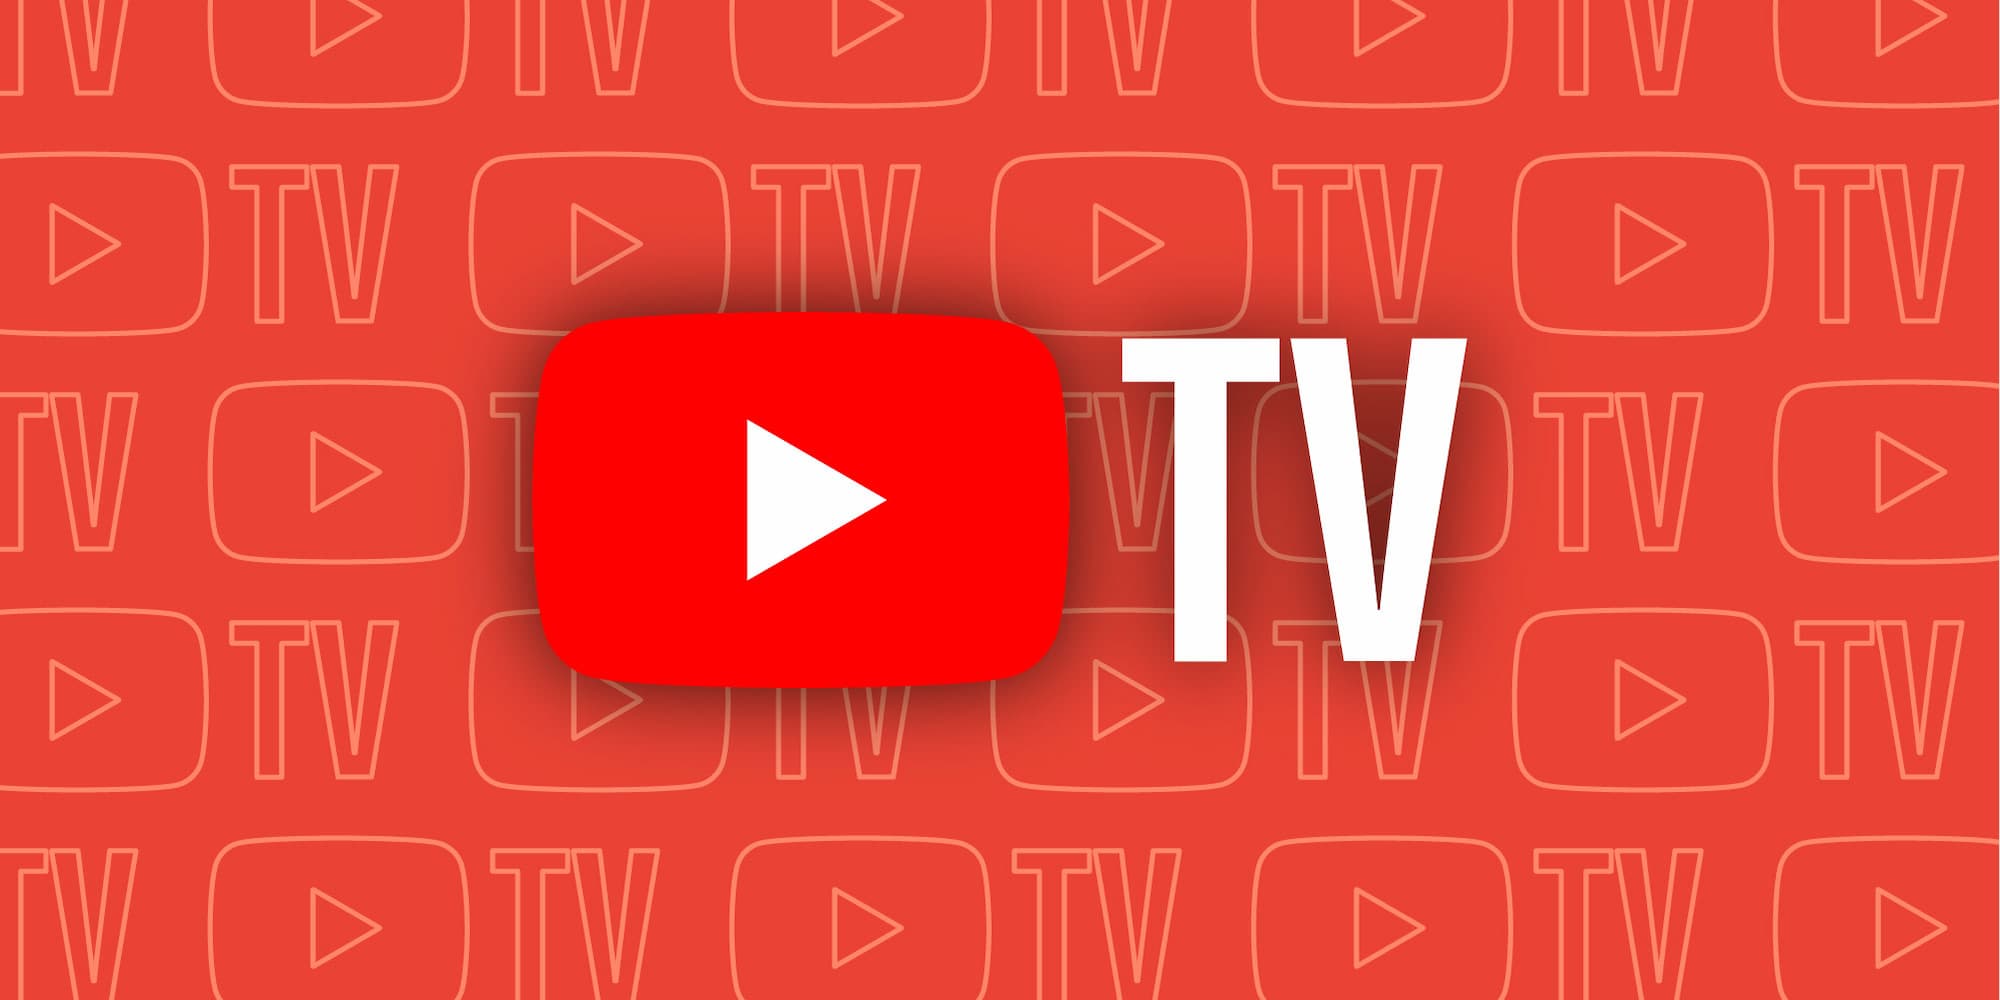 Heres how much NFL Sunday Ticket costs on YouTube TV